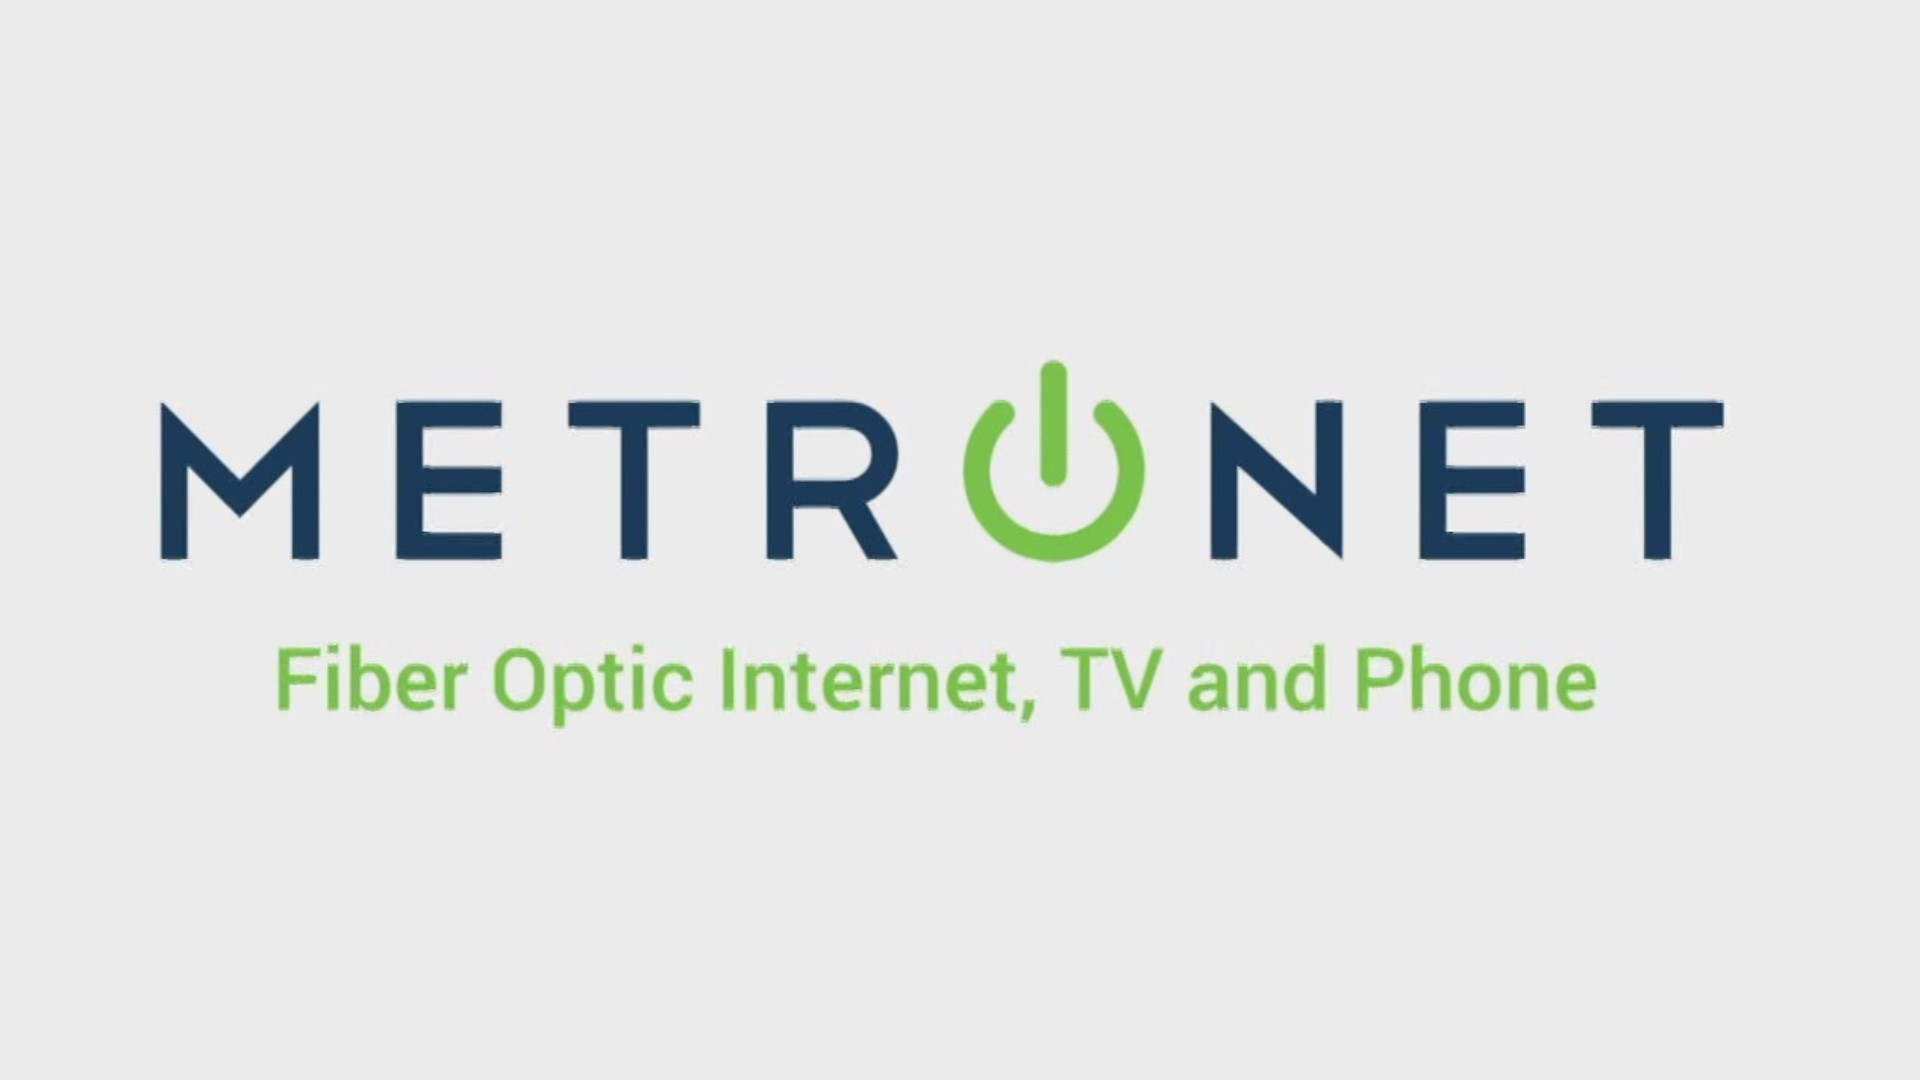 MetroNet's fiber service will be the company's first dip in the State of Texas.